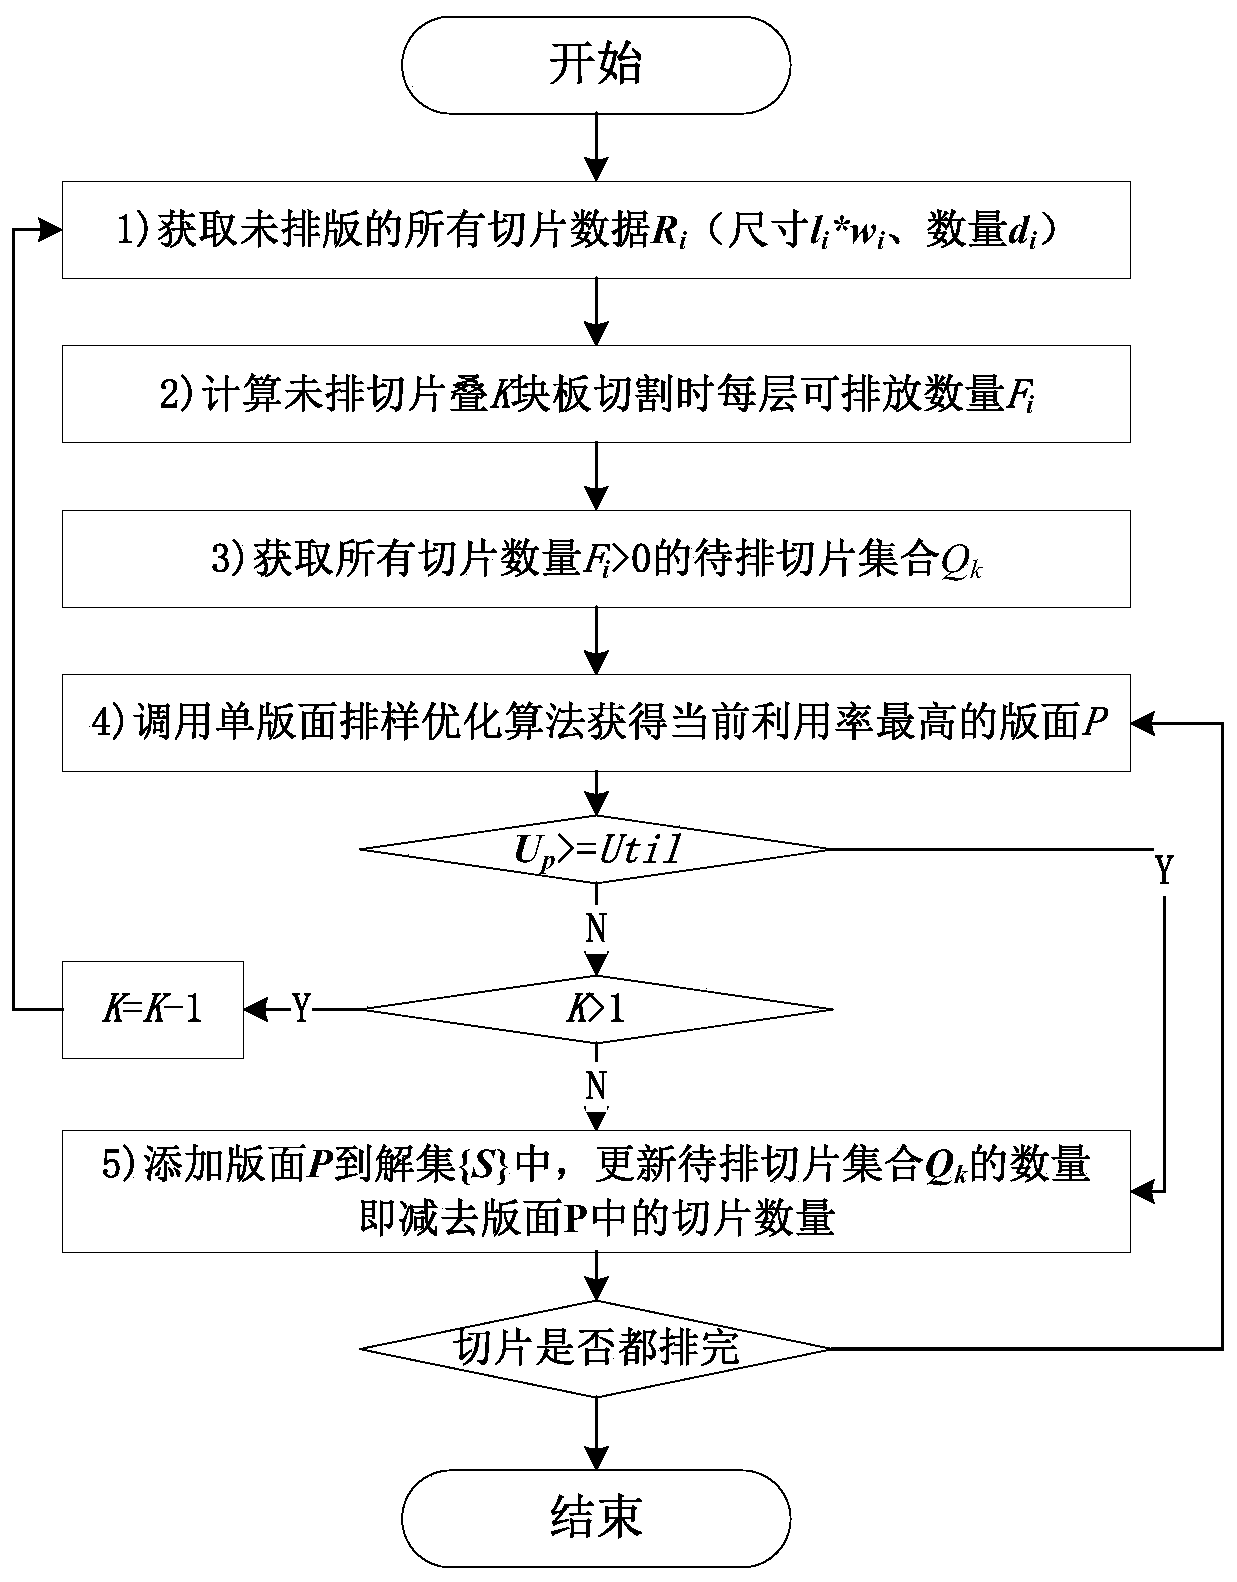 Layered iterative layout optimization method considering cutting efficiency and utilization rate